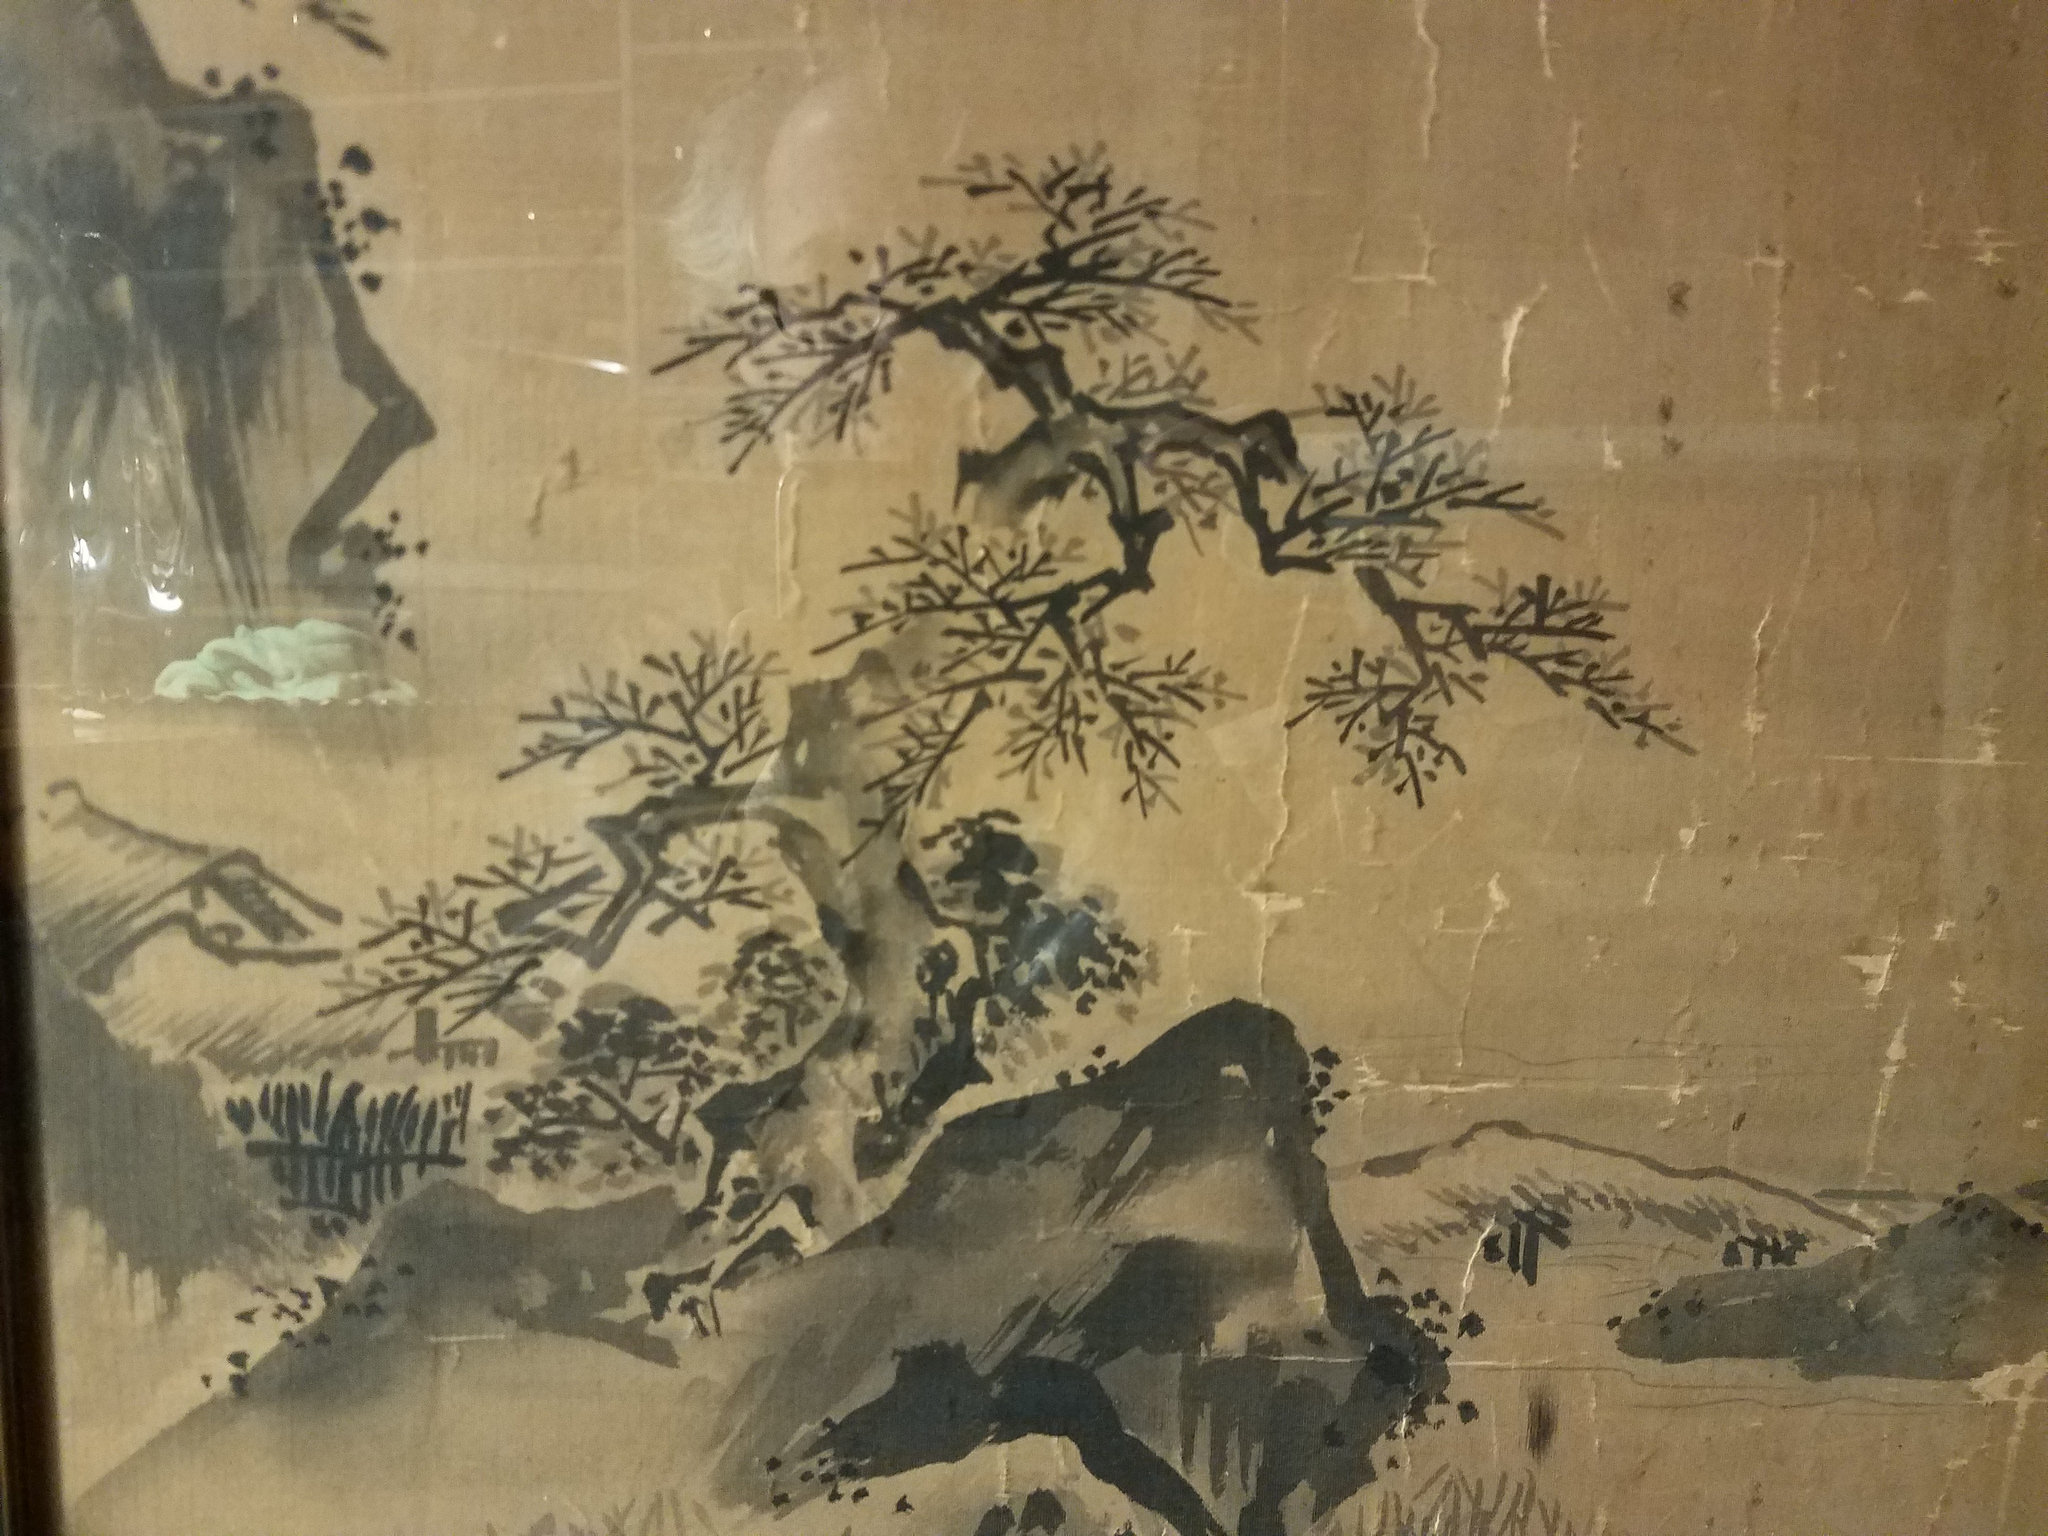 Ink wash painting on silk - Chinese - possibly very old ...